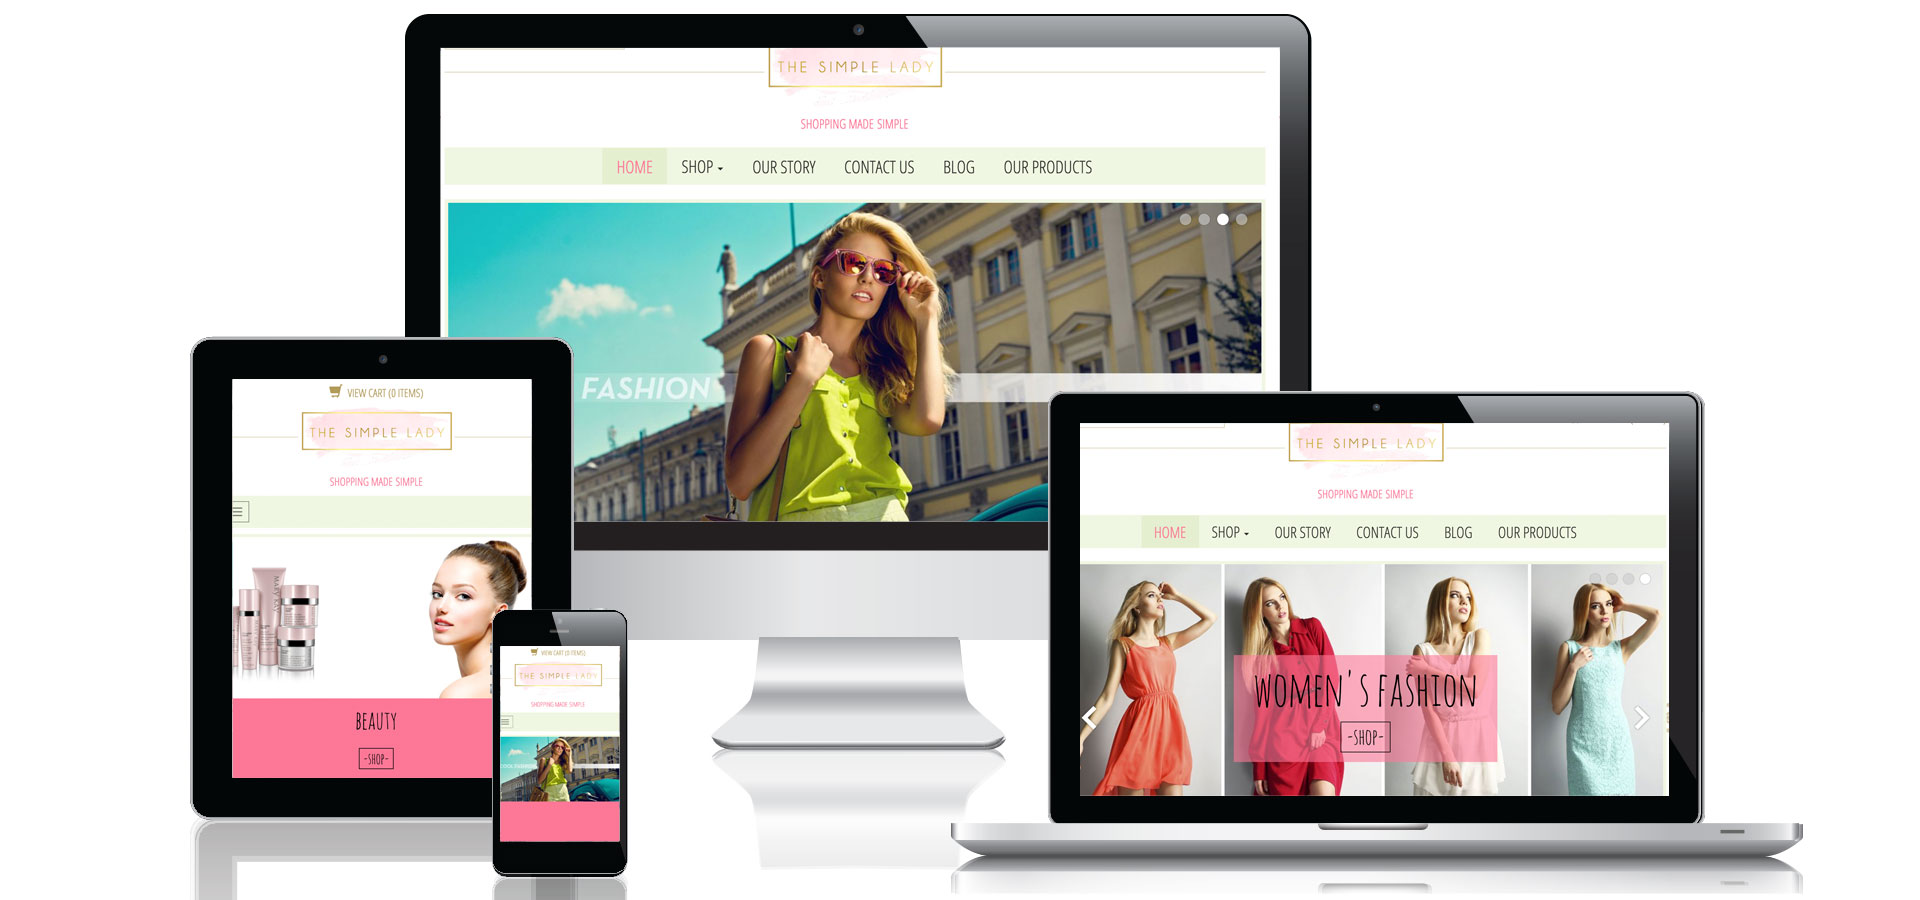 The Simple Lady eccommerce website